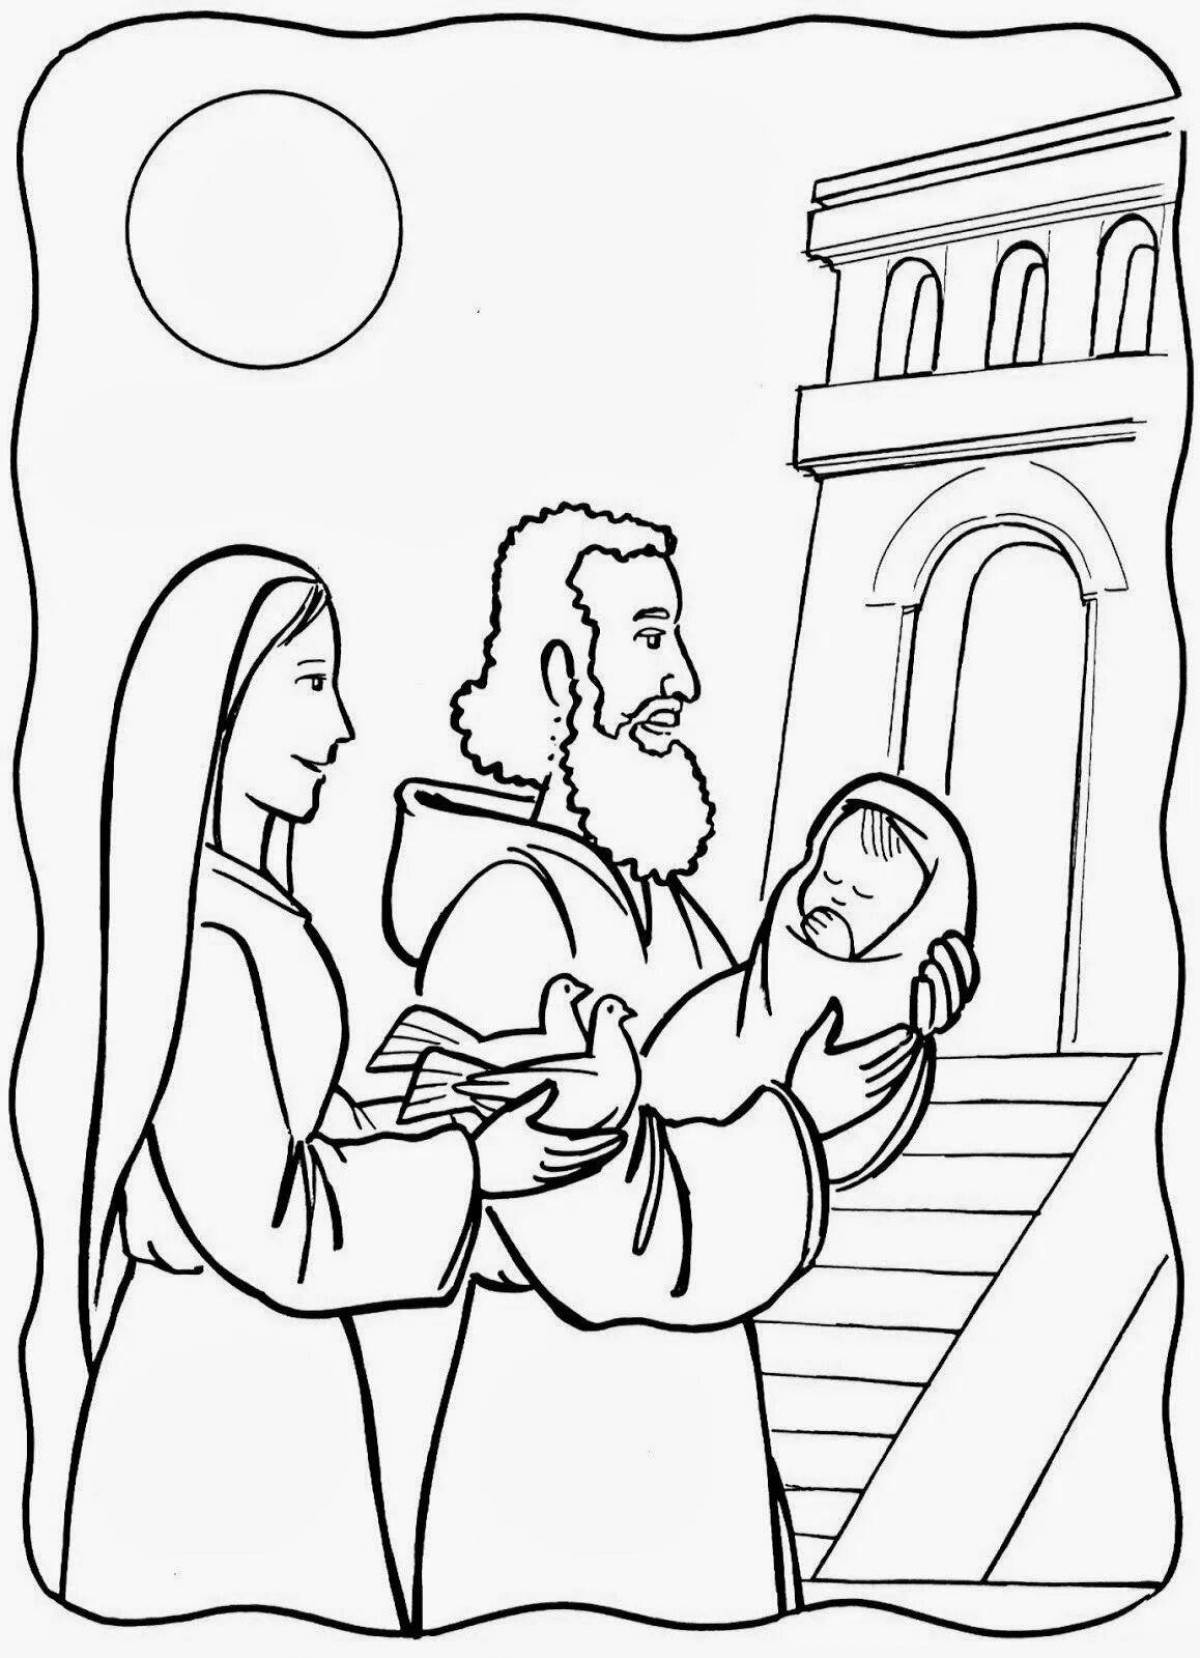 Coloring page of holiday meeting